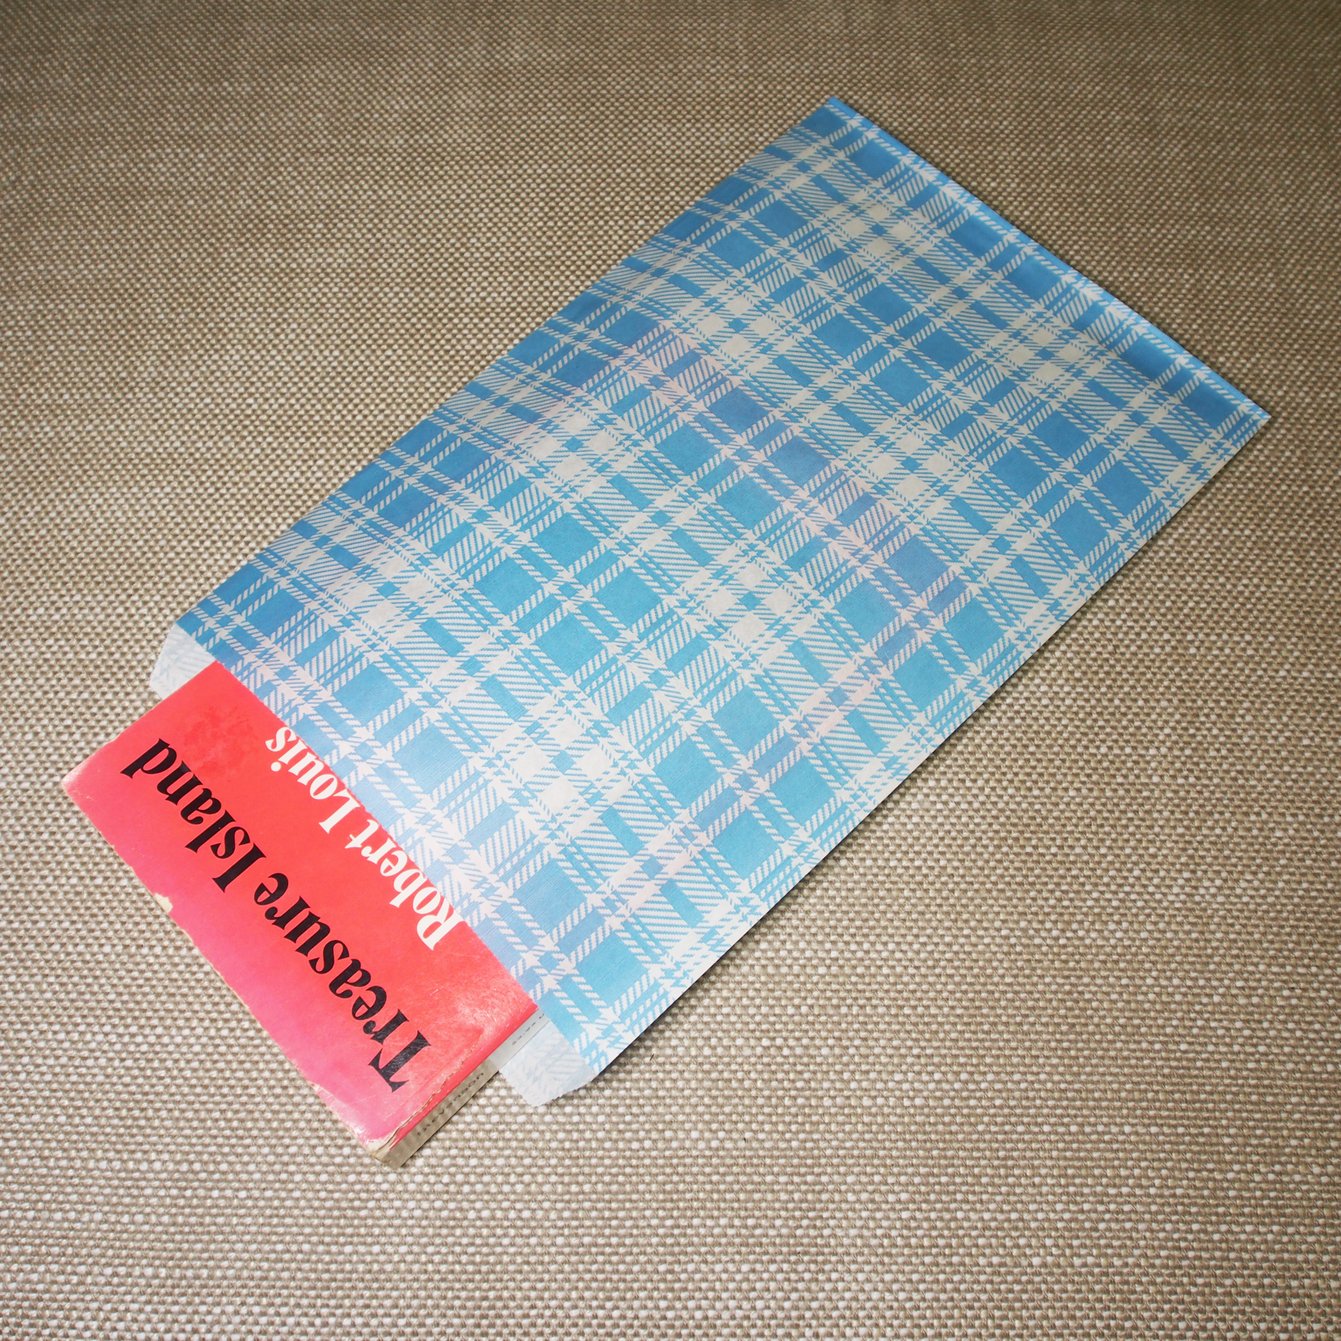 Mixed Plaid Pattern Flat Paper Gift Bags for Retail, Packaging, Party Favors, Merchandise, Crafts, Holidays, Weddings, and more.